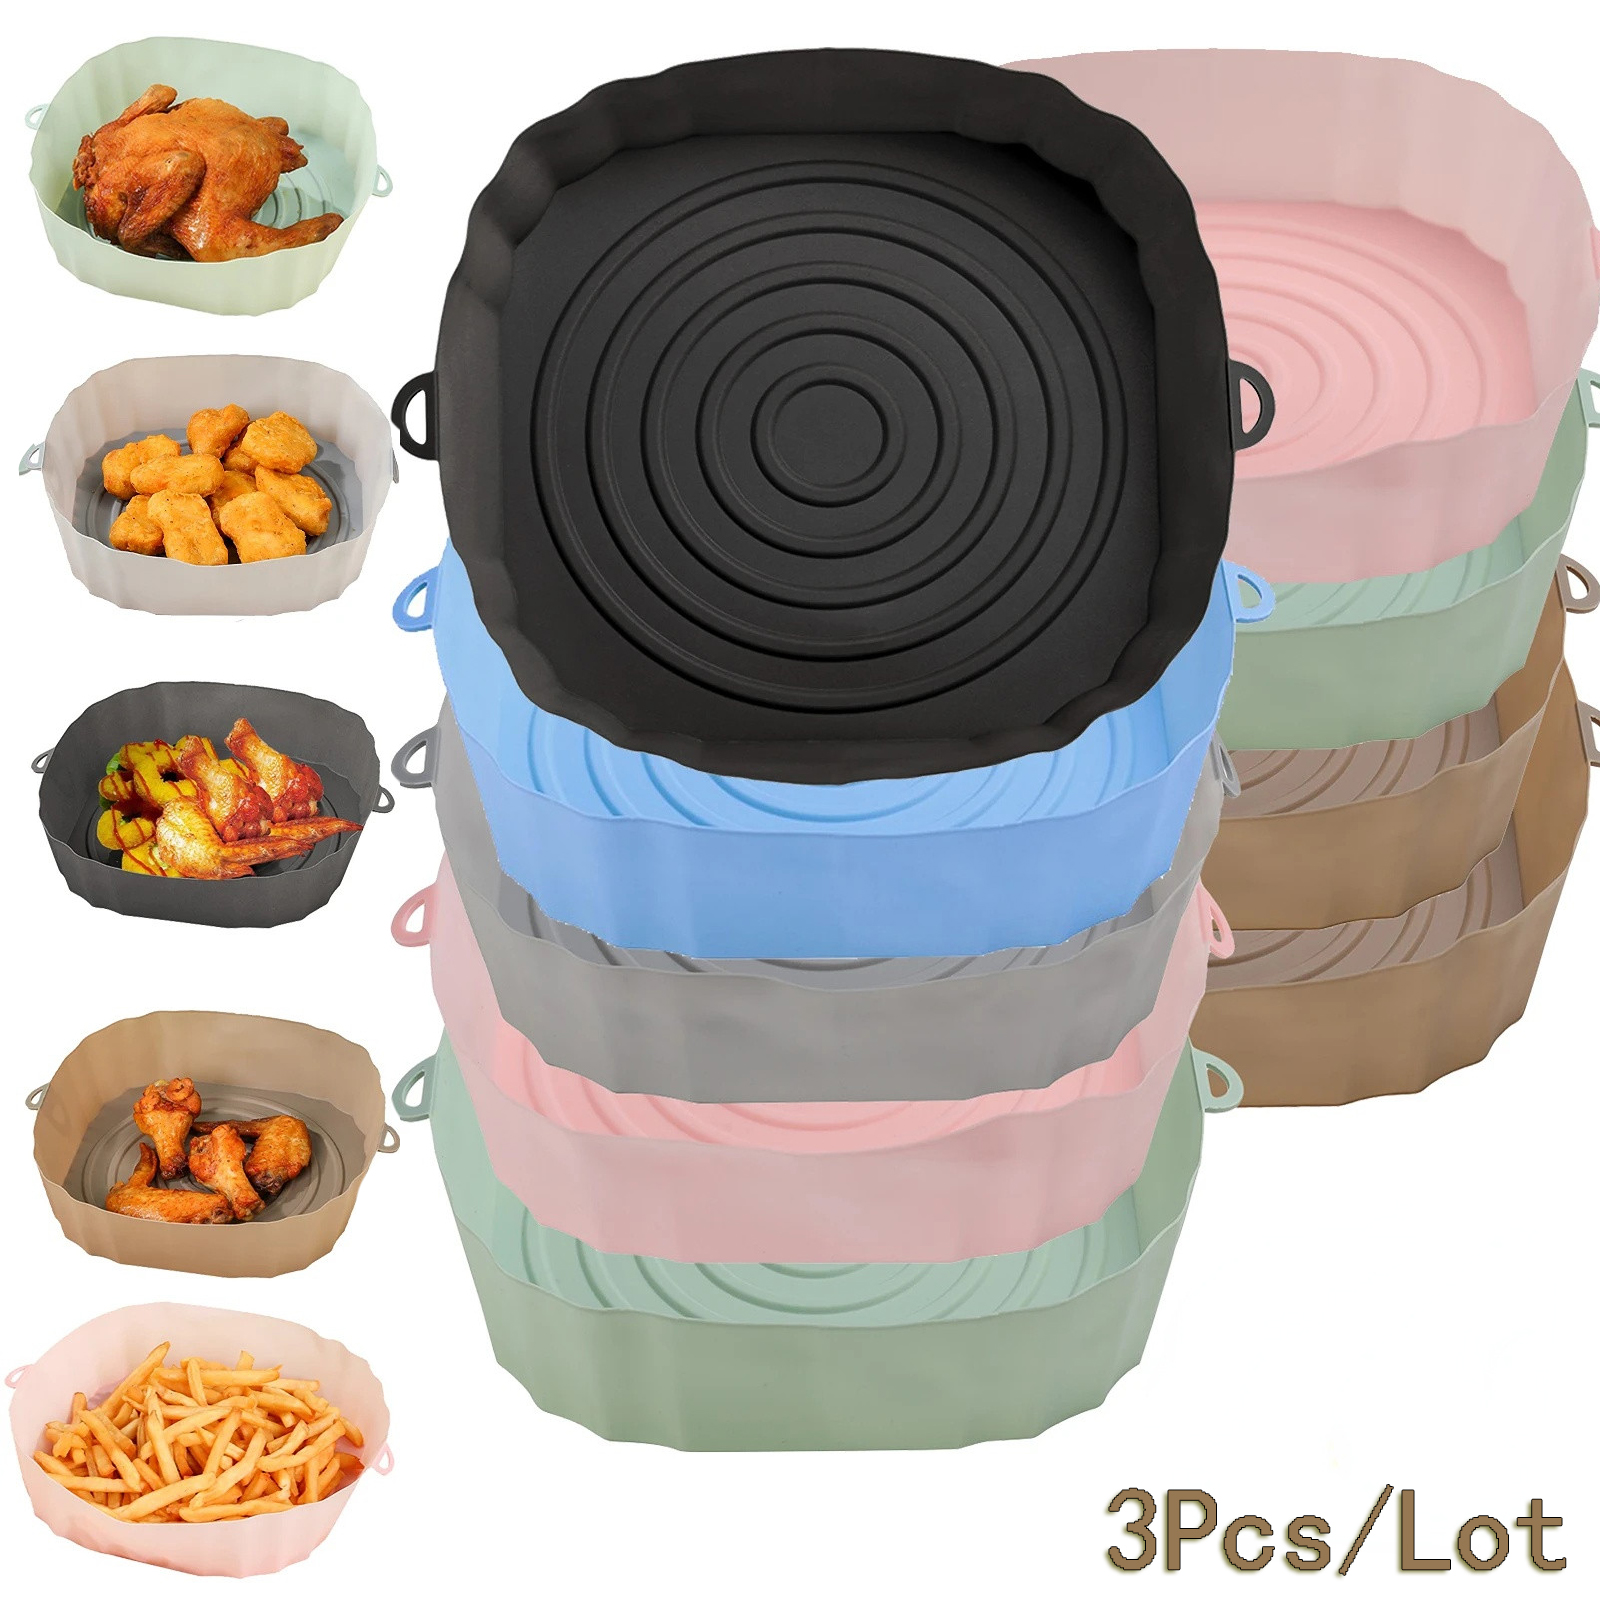 

3pcs, Silicone Air Fryer Liners (7.09''), Air Fryer Liner Pots, Silicone Basket Bowls, Reusable Baking Trays, Oven Accessories, Baking Tools, Kitchen Gadgets, Kitchen Accessories, Home Kitchen Items